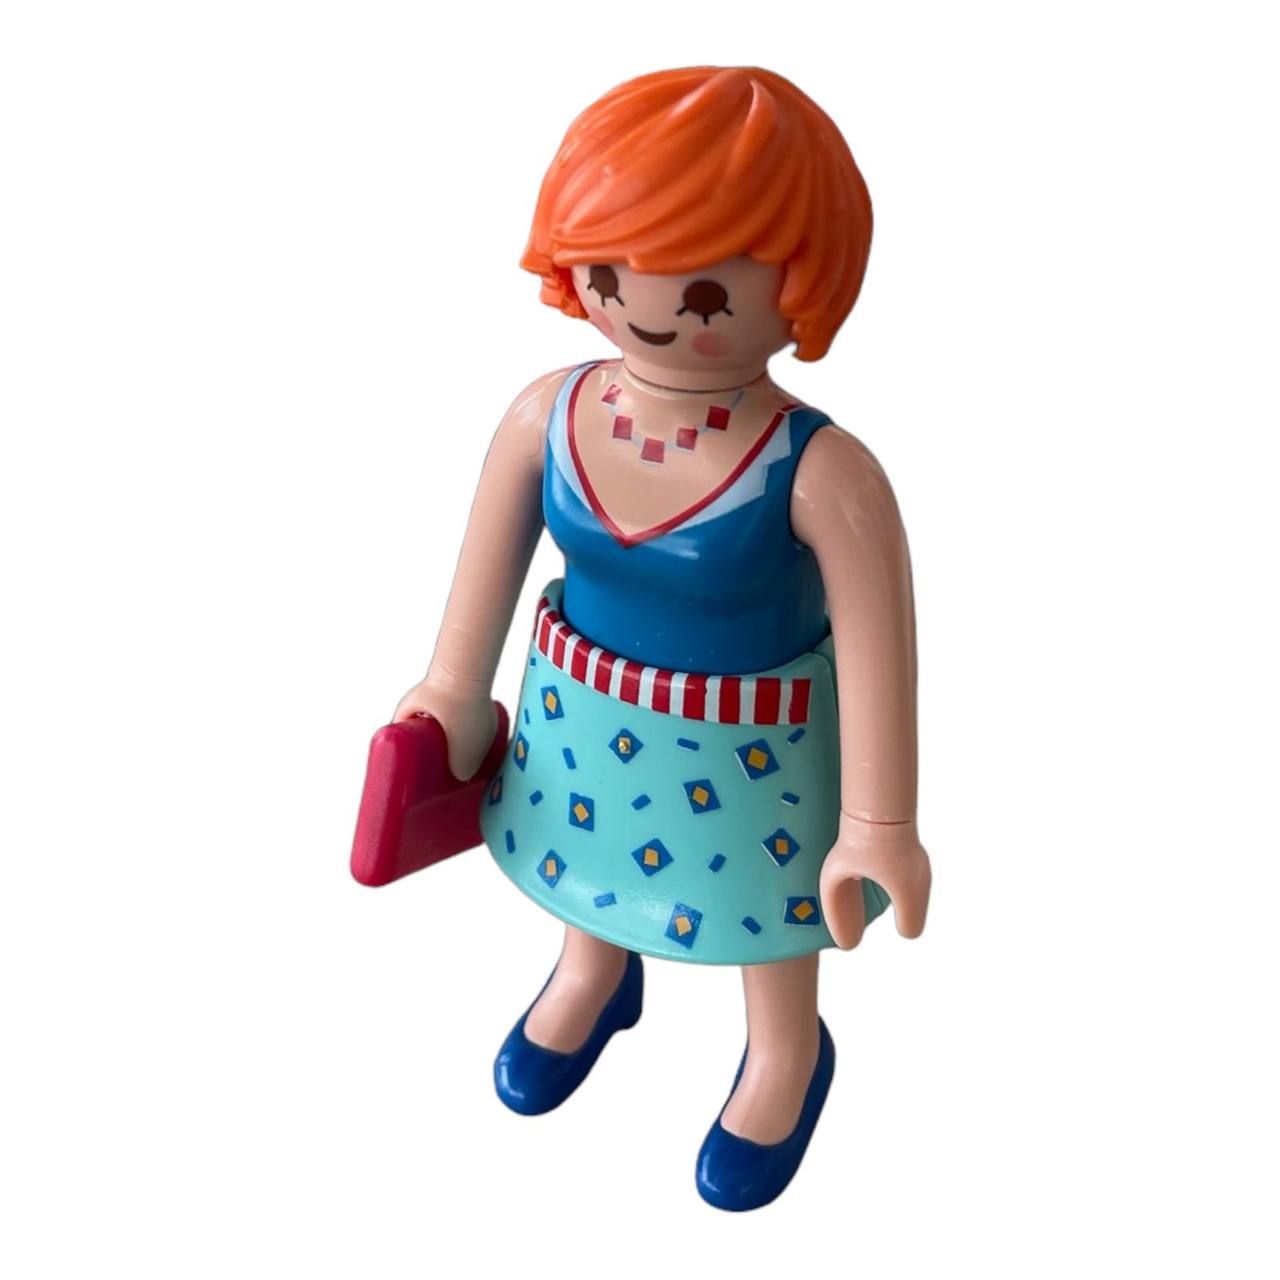 Playmobil ® Clothing Boutique 5486